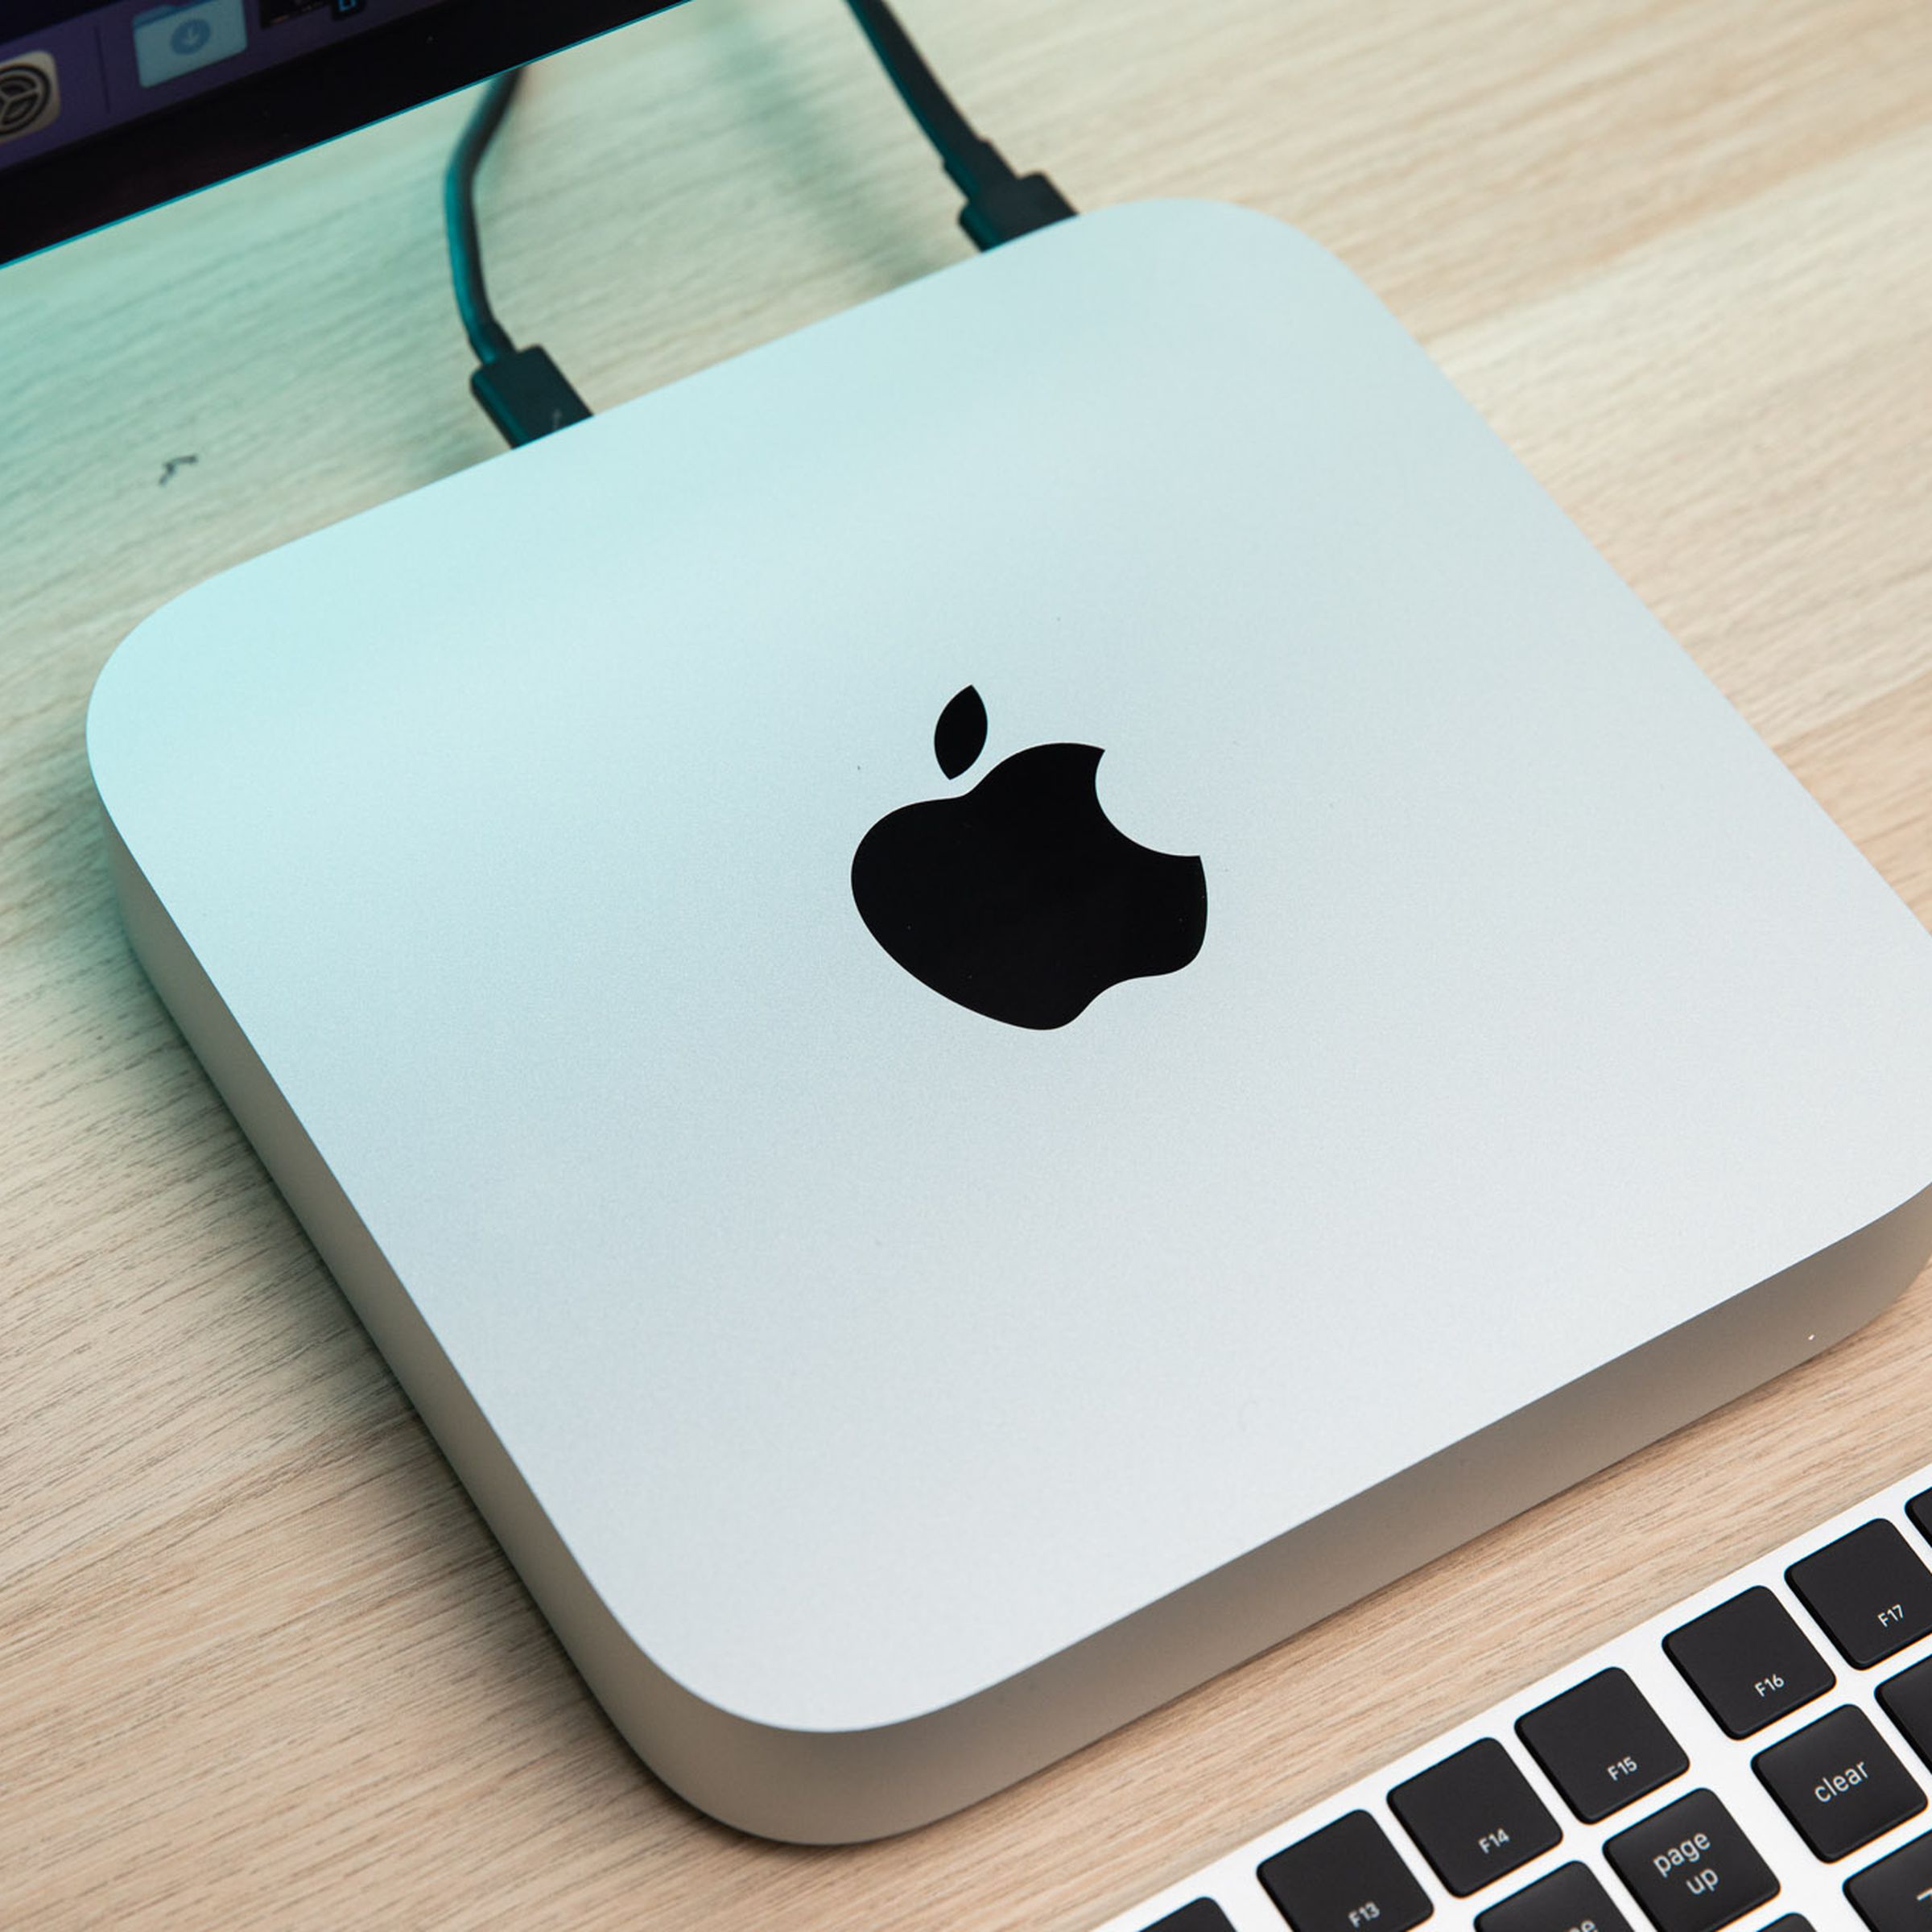 The Mac Mini sitting on a wood table underneath a monitor and beside a keyboard.